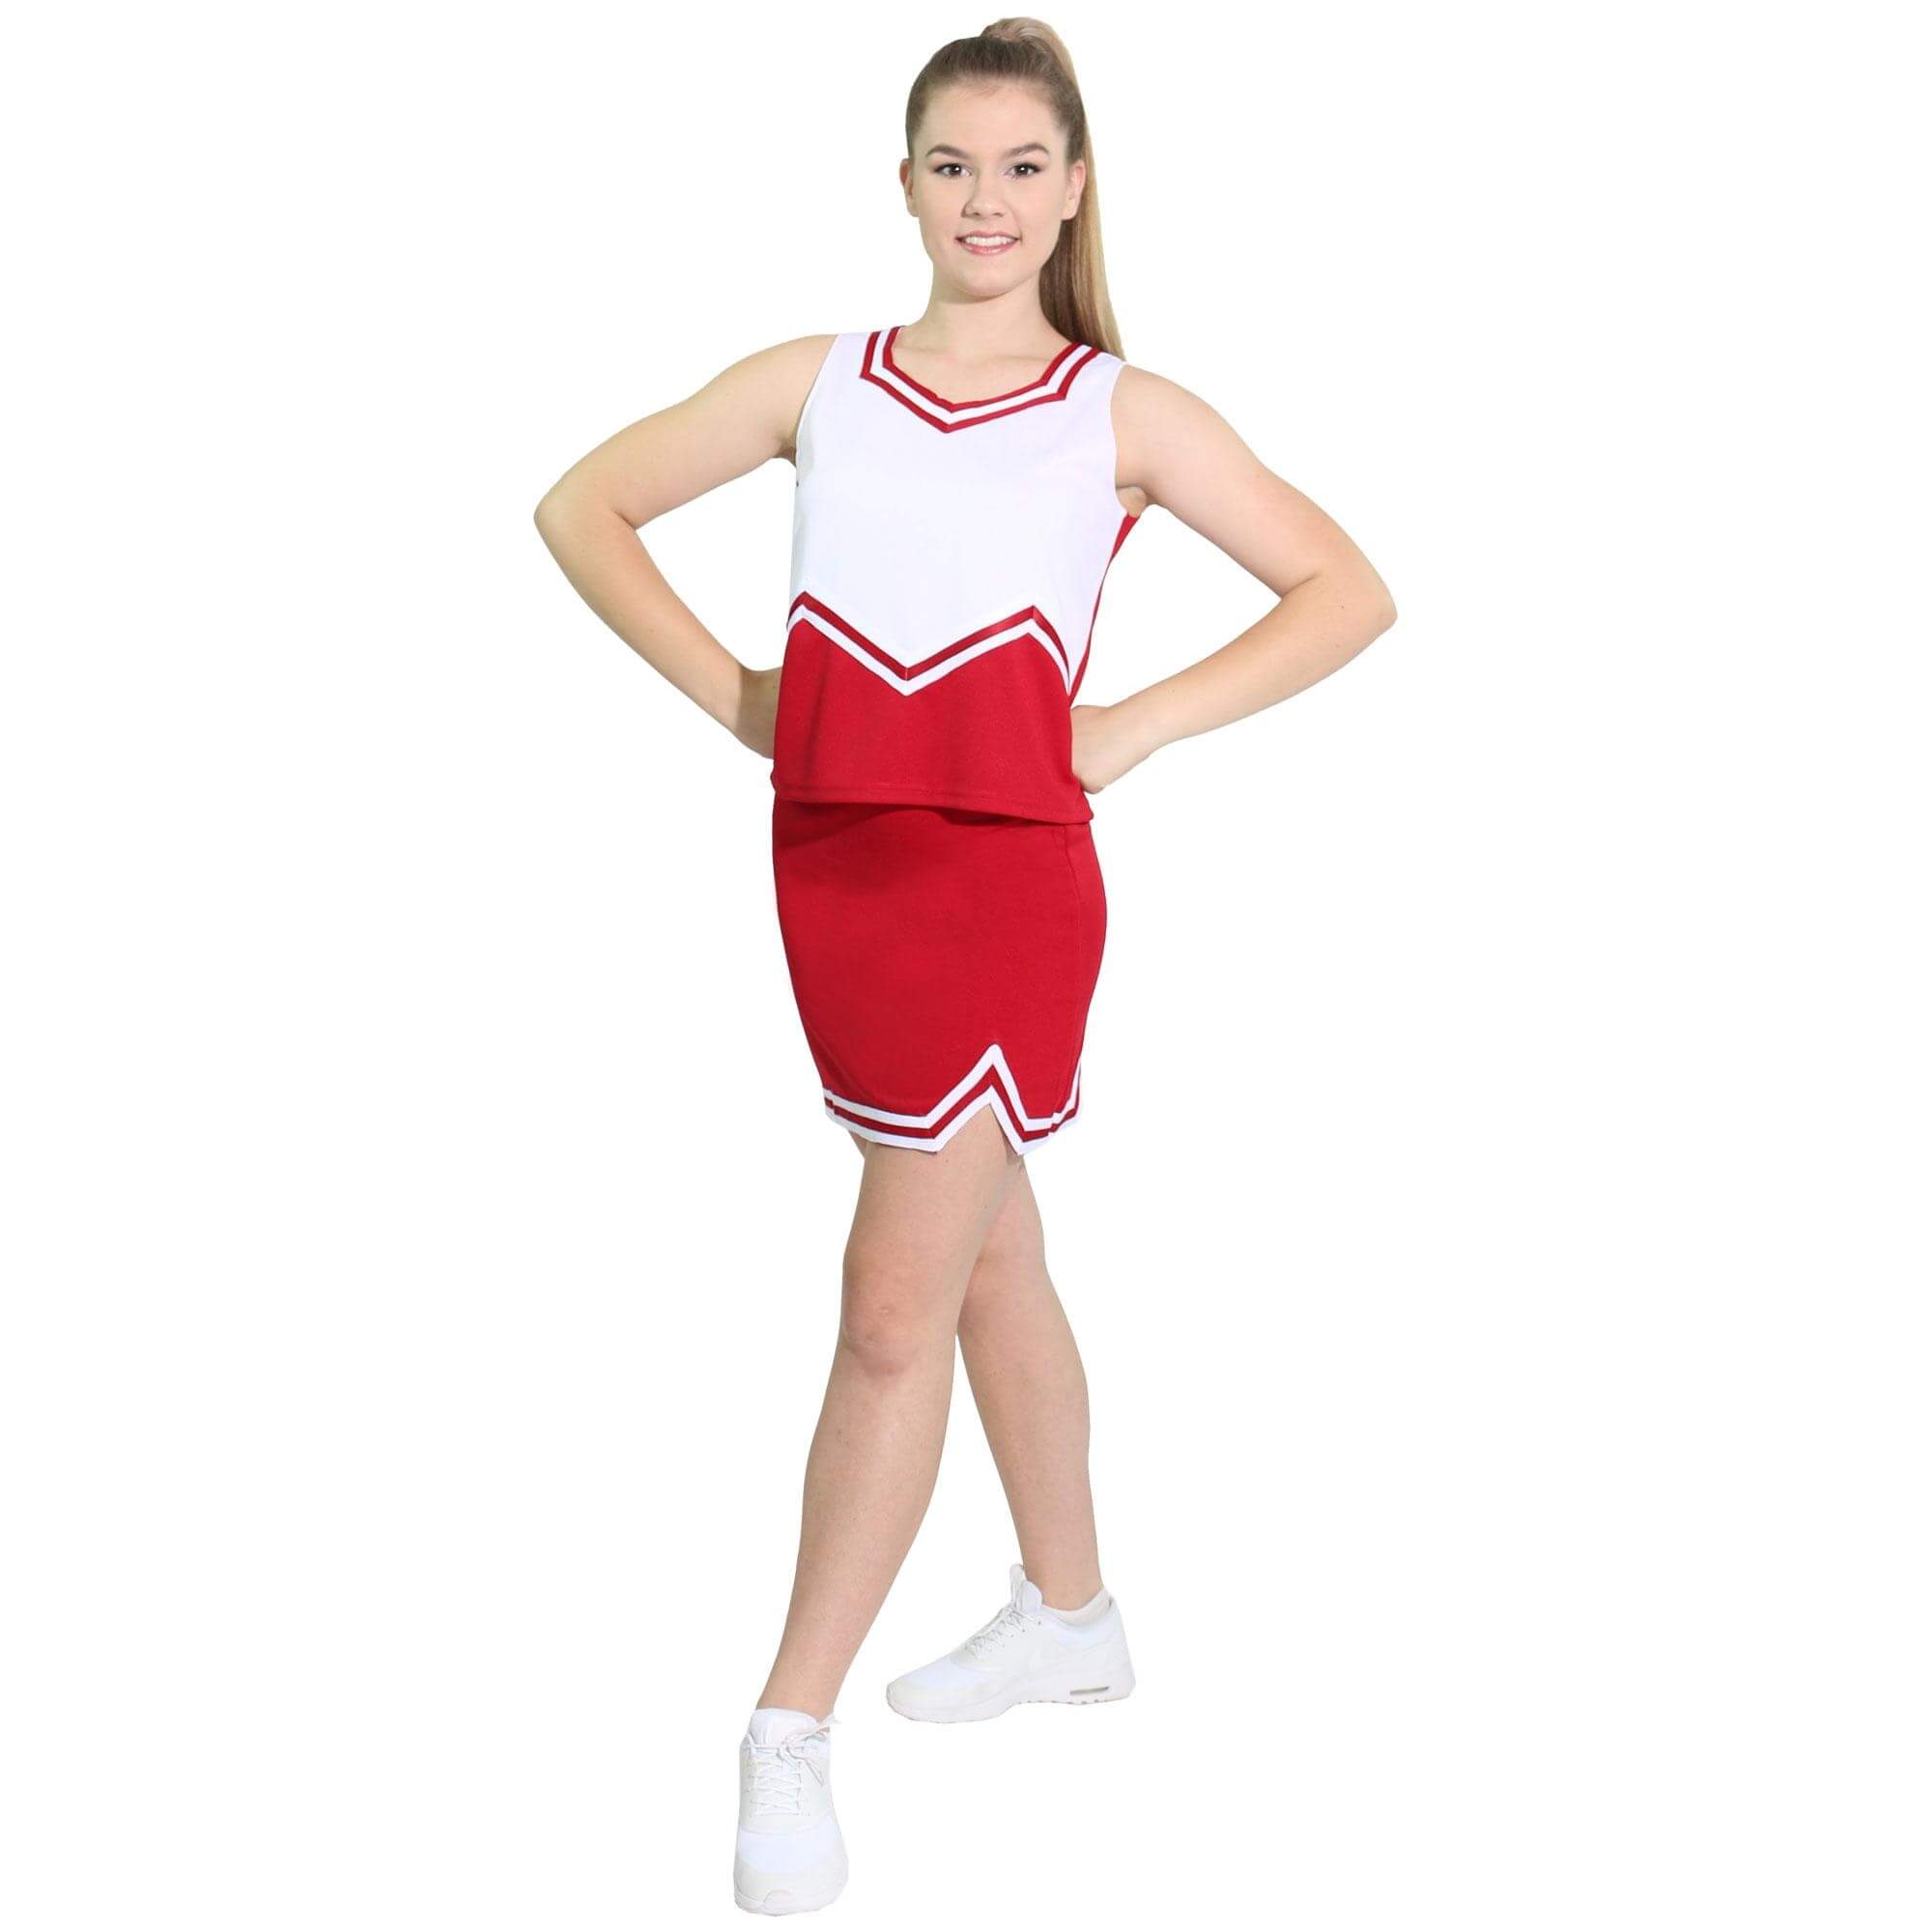 Danzcue Adult M Sweetheart Cheerleaders Uniform Shell Top - Click Image to Close